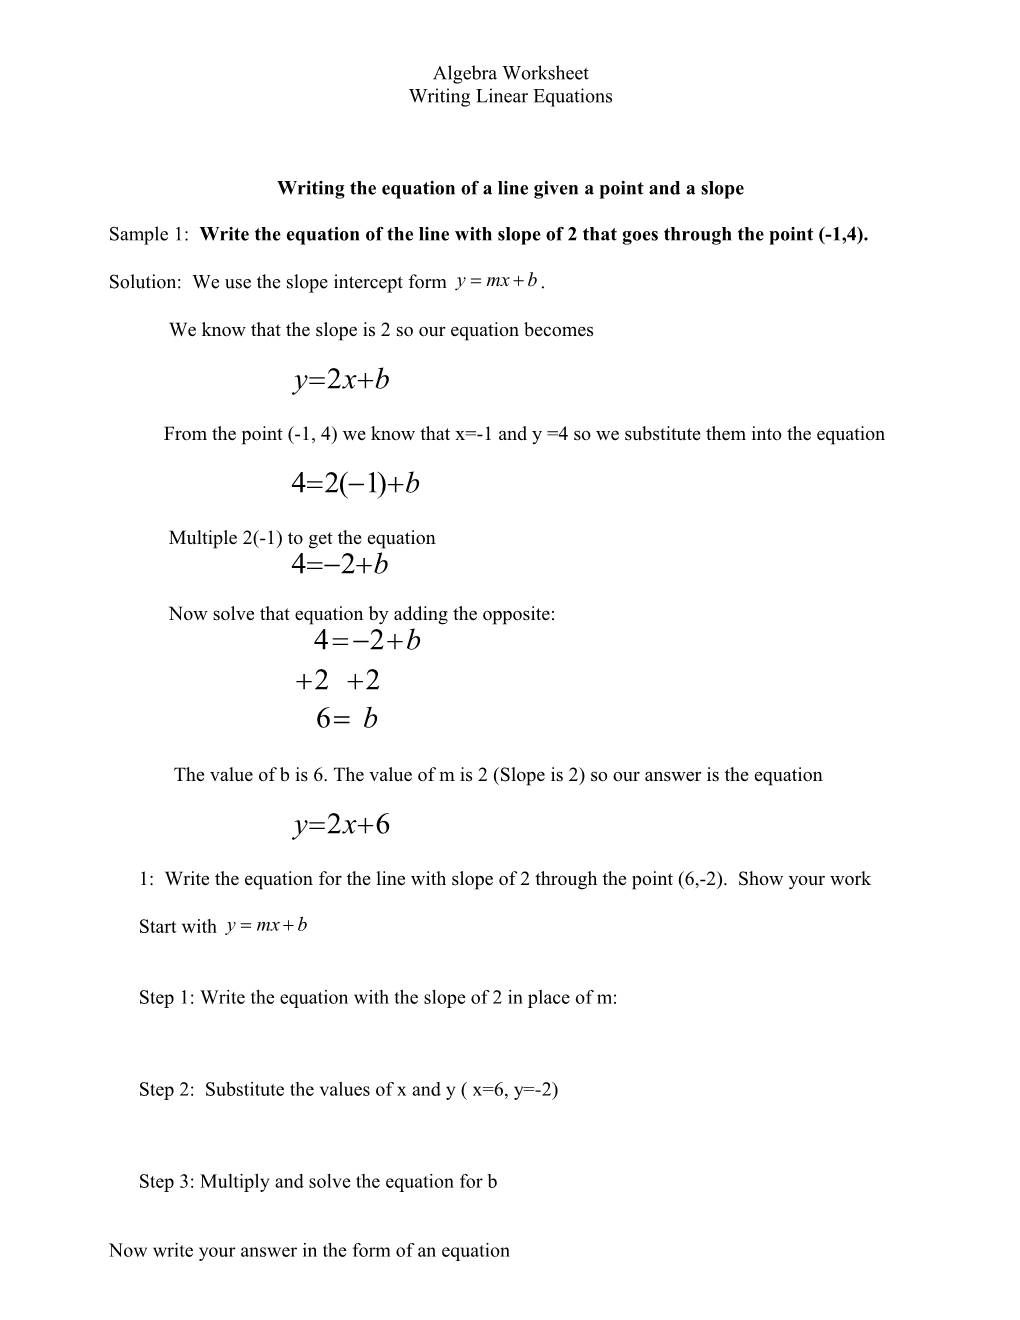 Writing the Equation of a Line Given a Point and a Slope